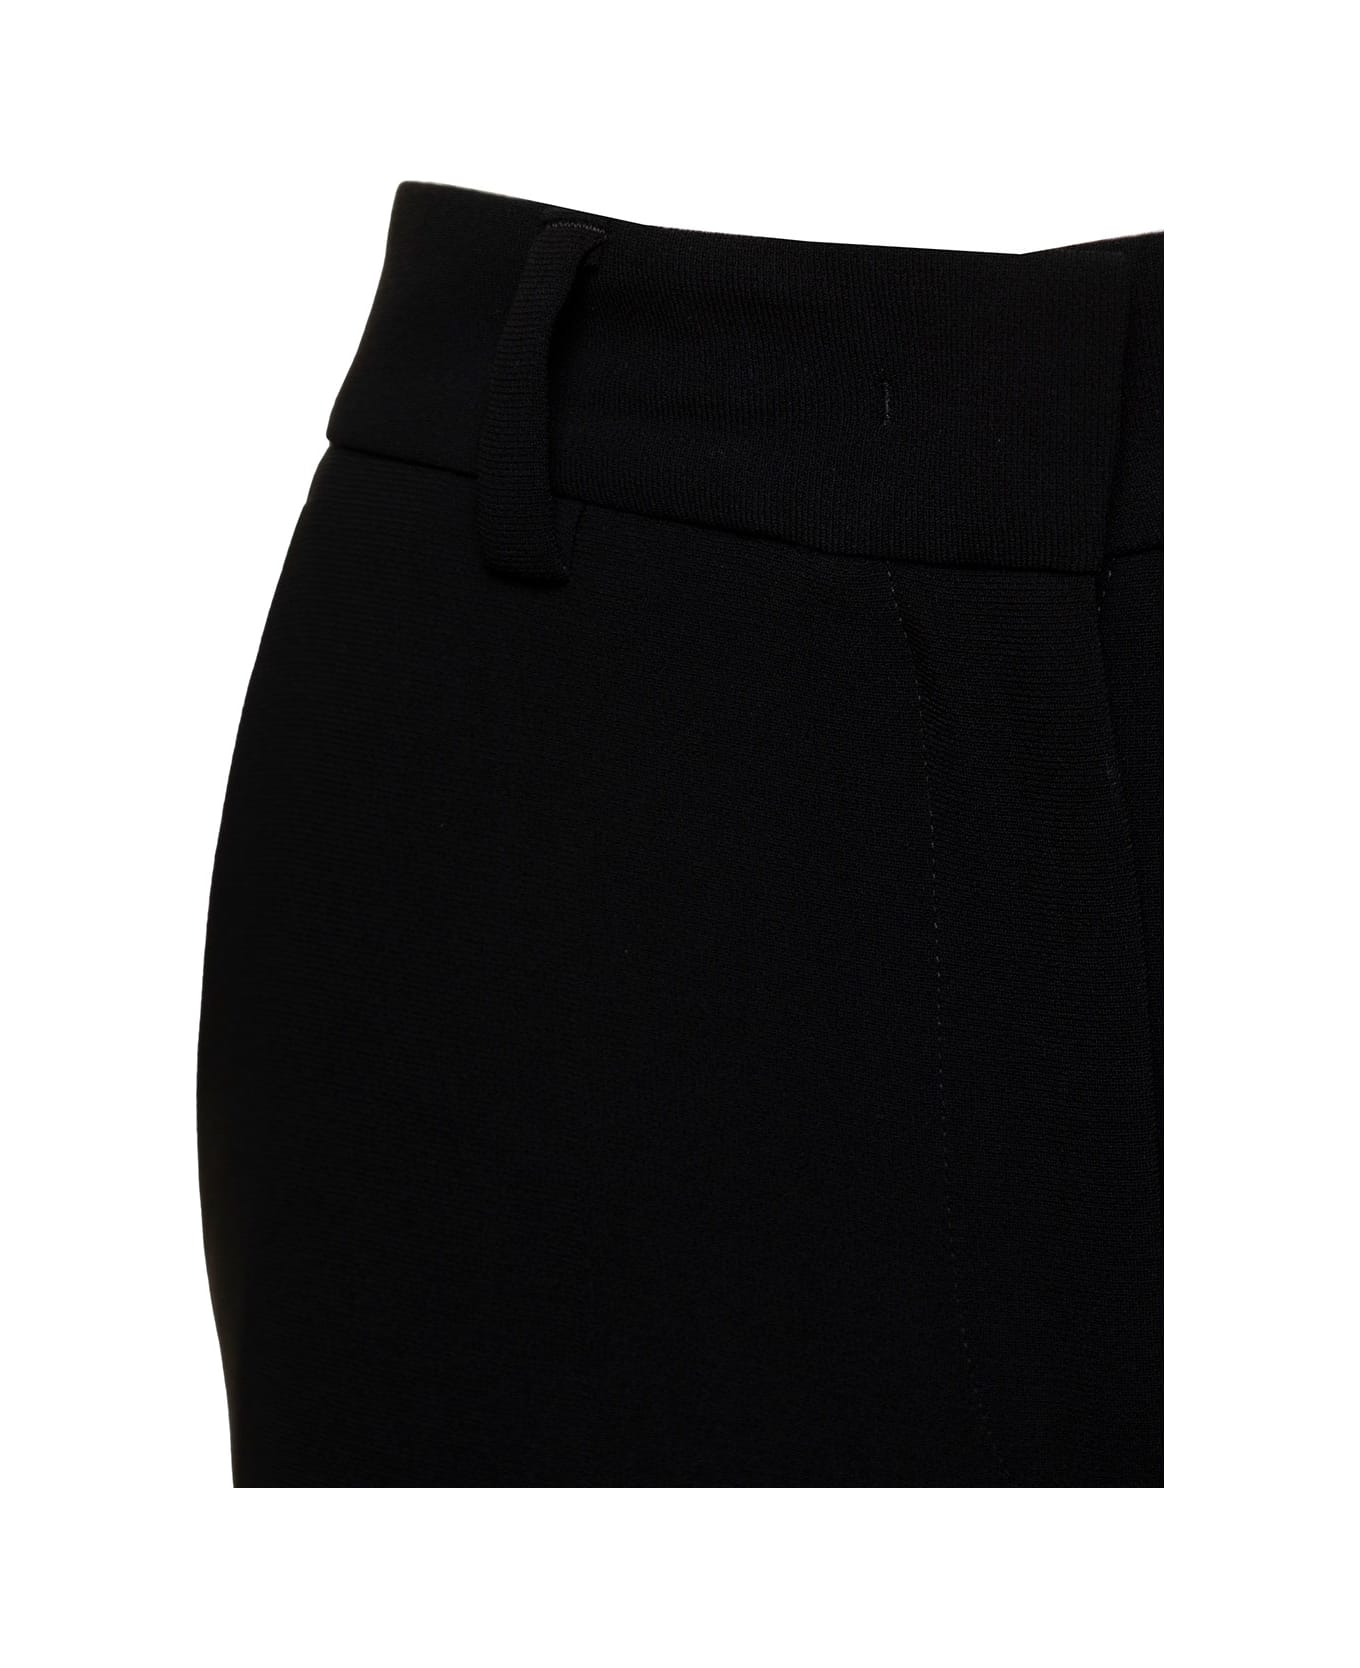 Alberto Biani Black Slightly Flared Pants With Concealed Fastening In Stretch Fabric Woman - Black